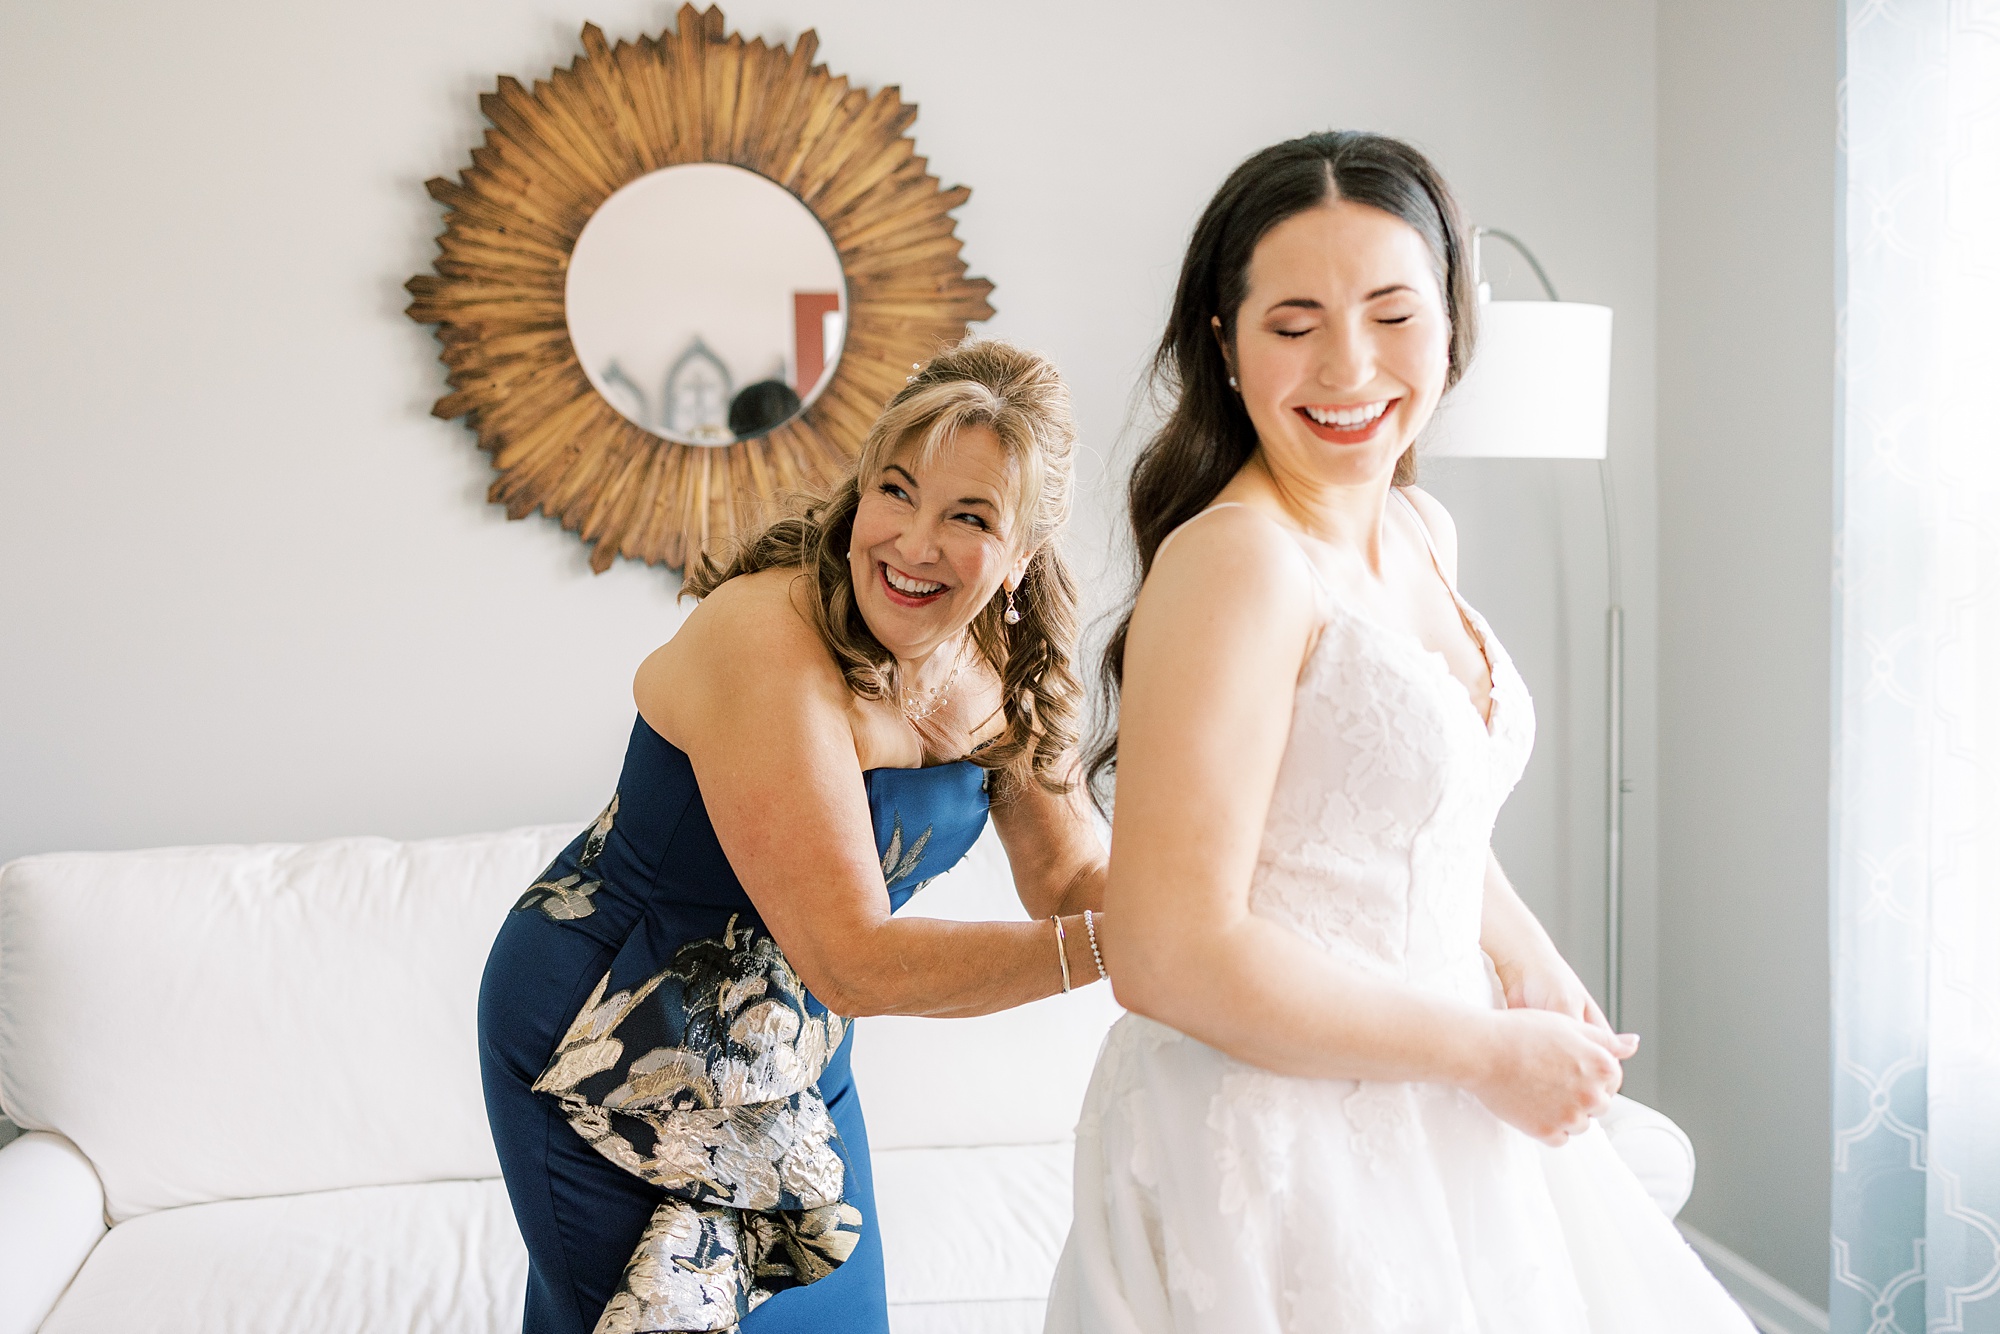 mother in blue dress helps bride into wedding dress